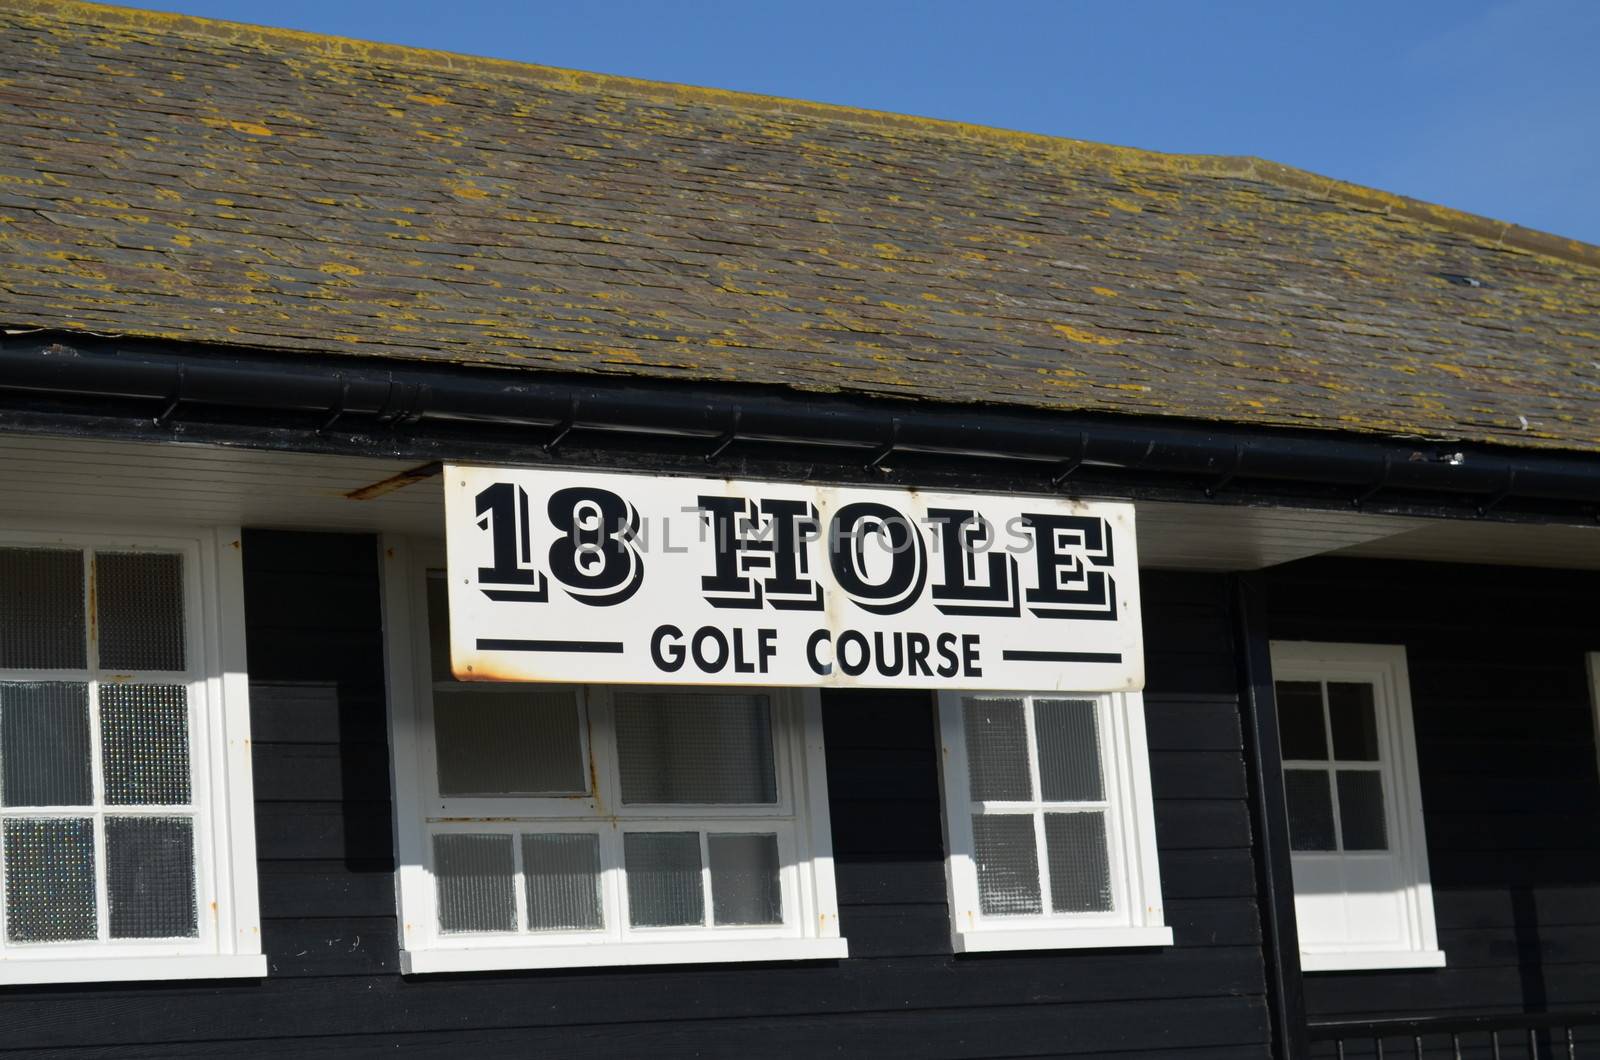 18th hole golf course sign attached to clubhouse.